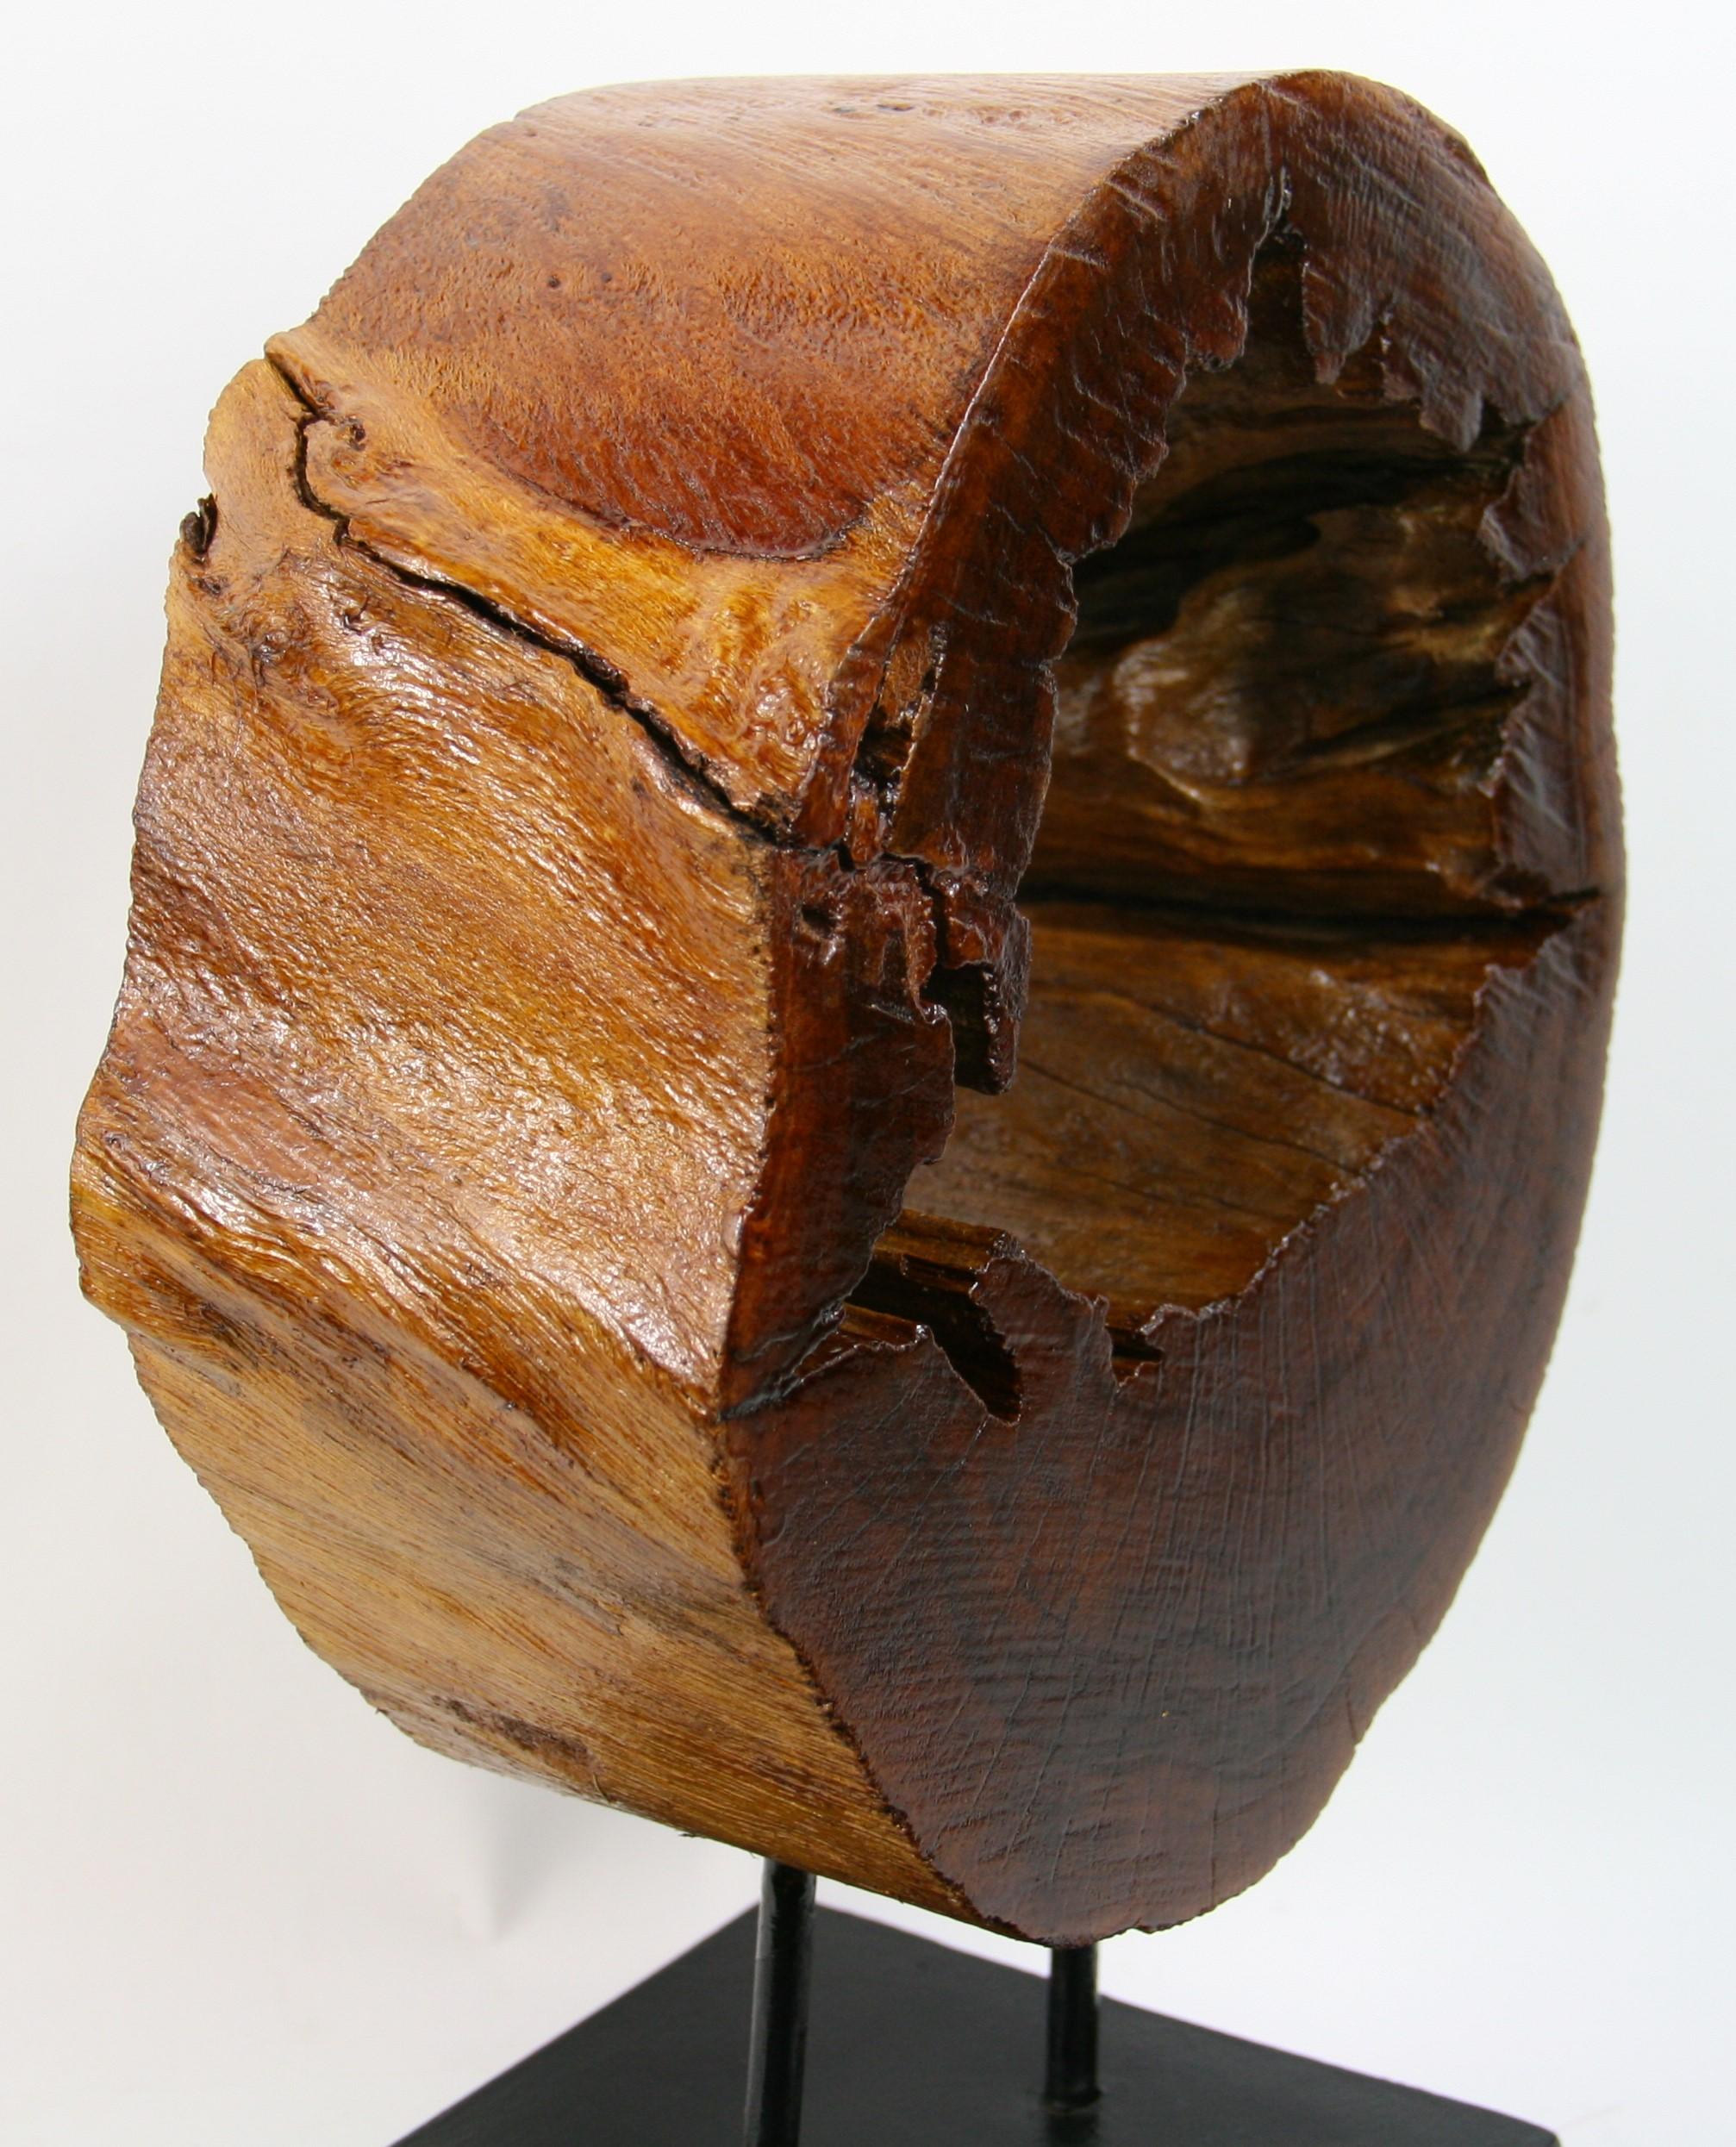 Cypress Tree Wood Sculpture by Brunelli - Brown Abstract Sculpture by Unknown